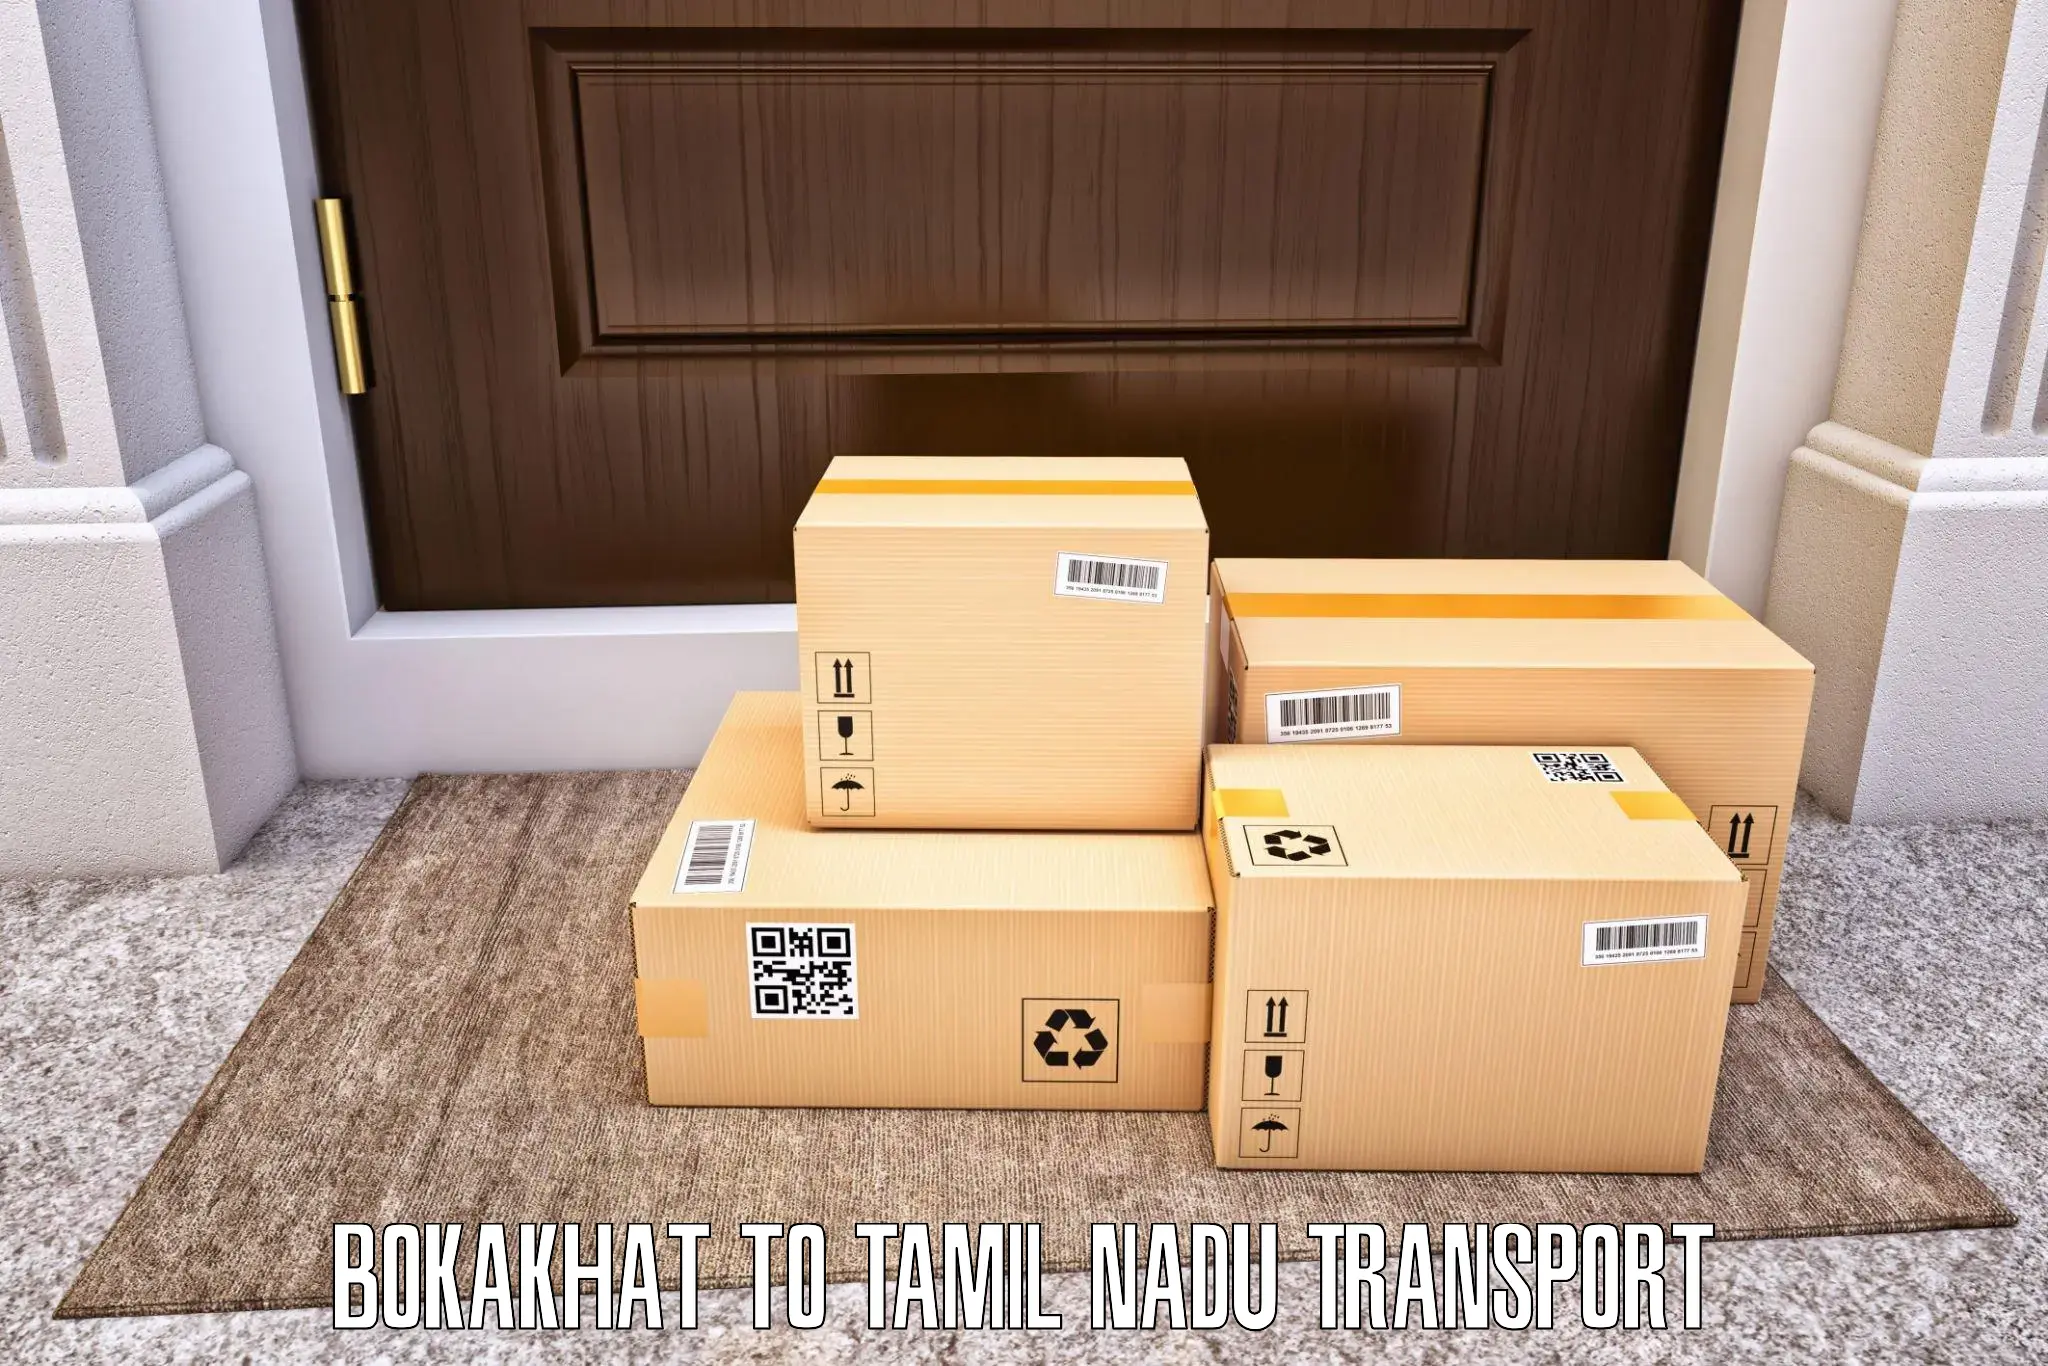 Transport in sharing Bokakhat to Annur